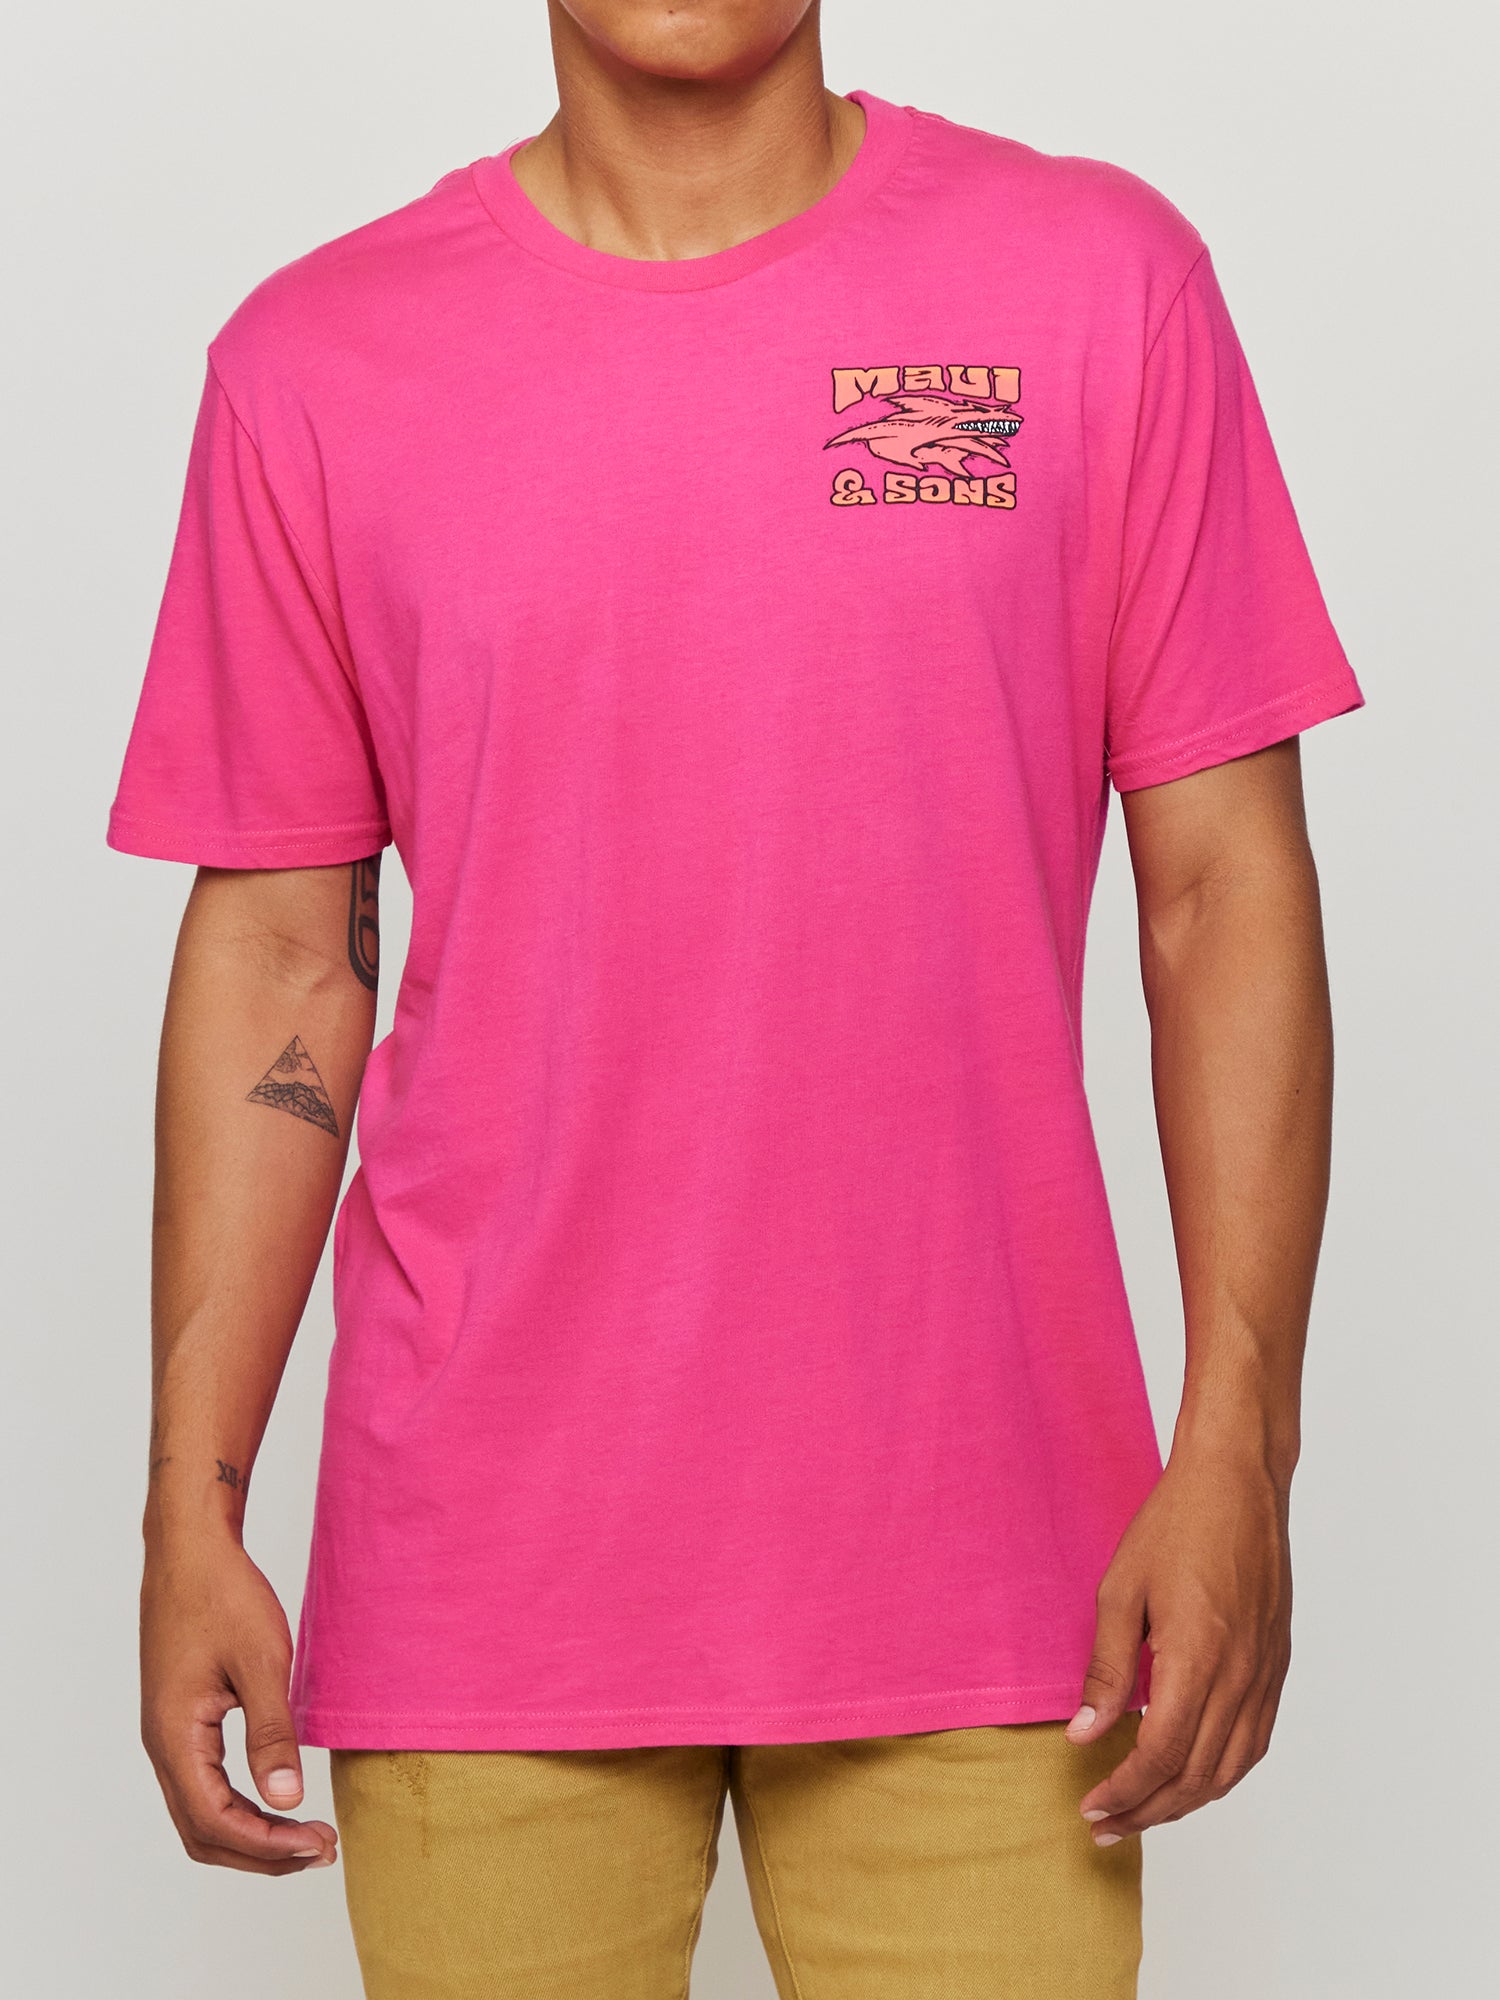 So Cal Twist T-Shirt in Hot Pink